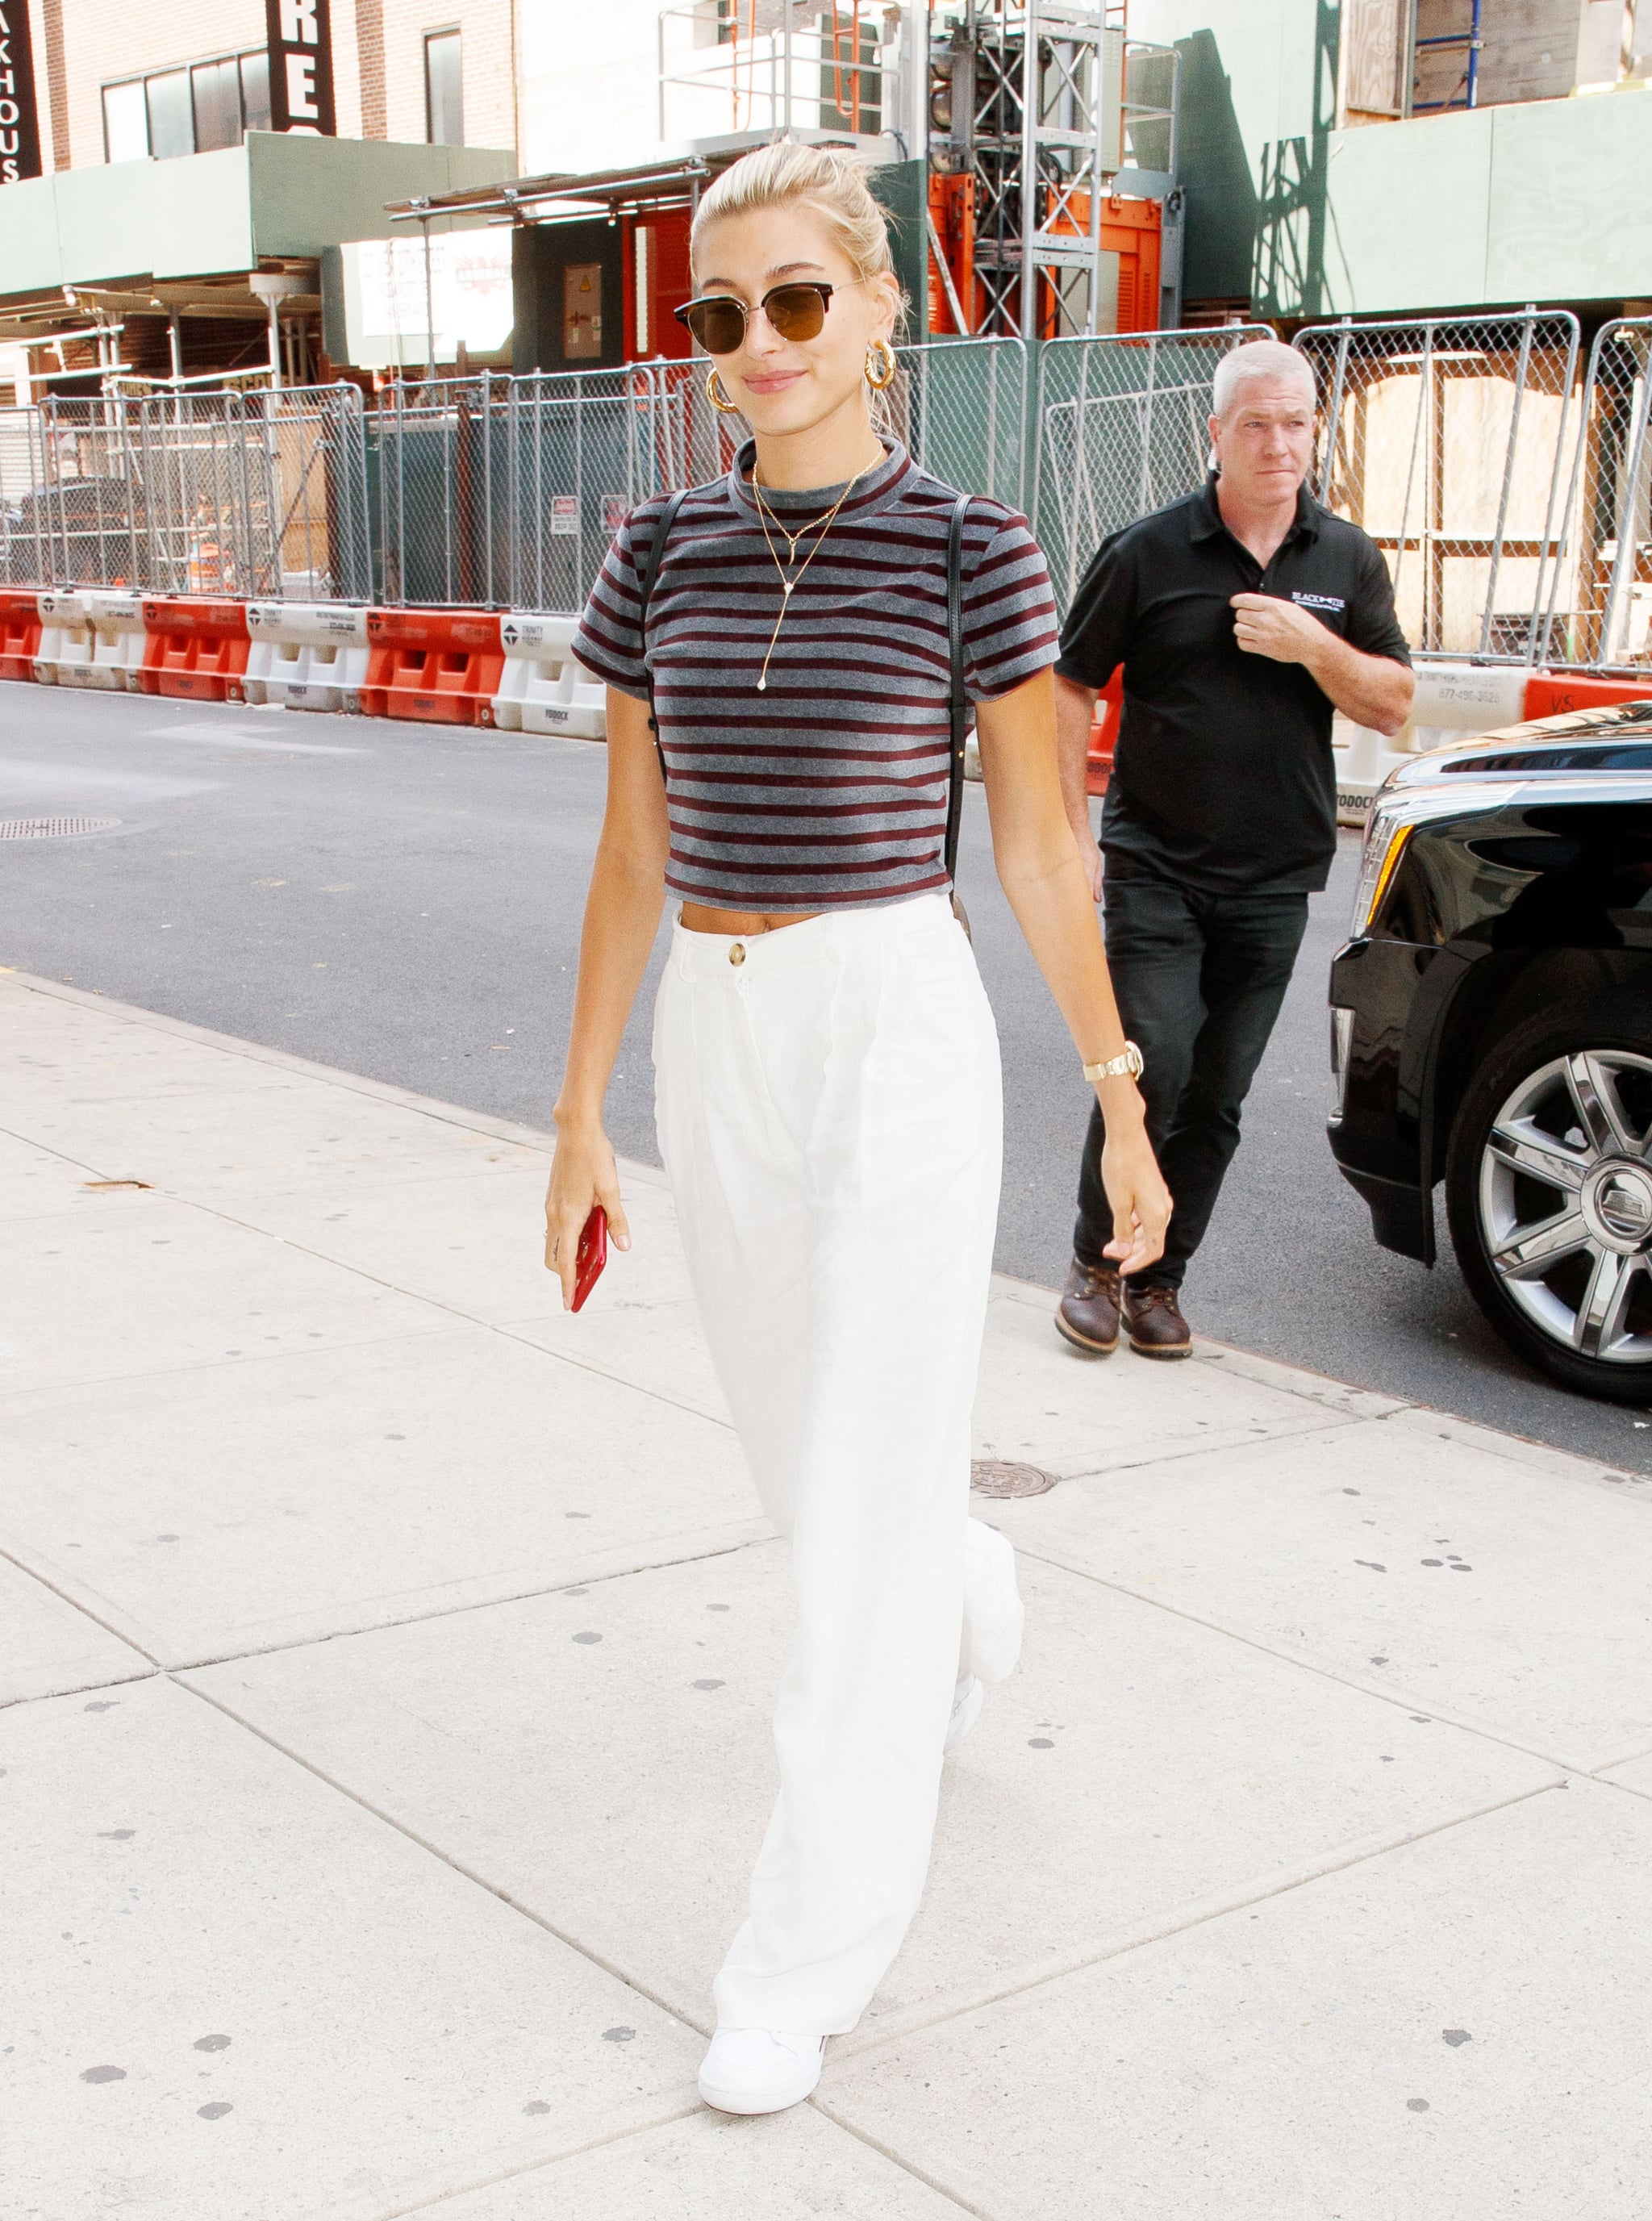 Fashion, Shopping & Style, Hailey Baldwin's Breezy White Pants Are Perfect  For a Day Date With Justin Bieber